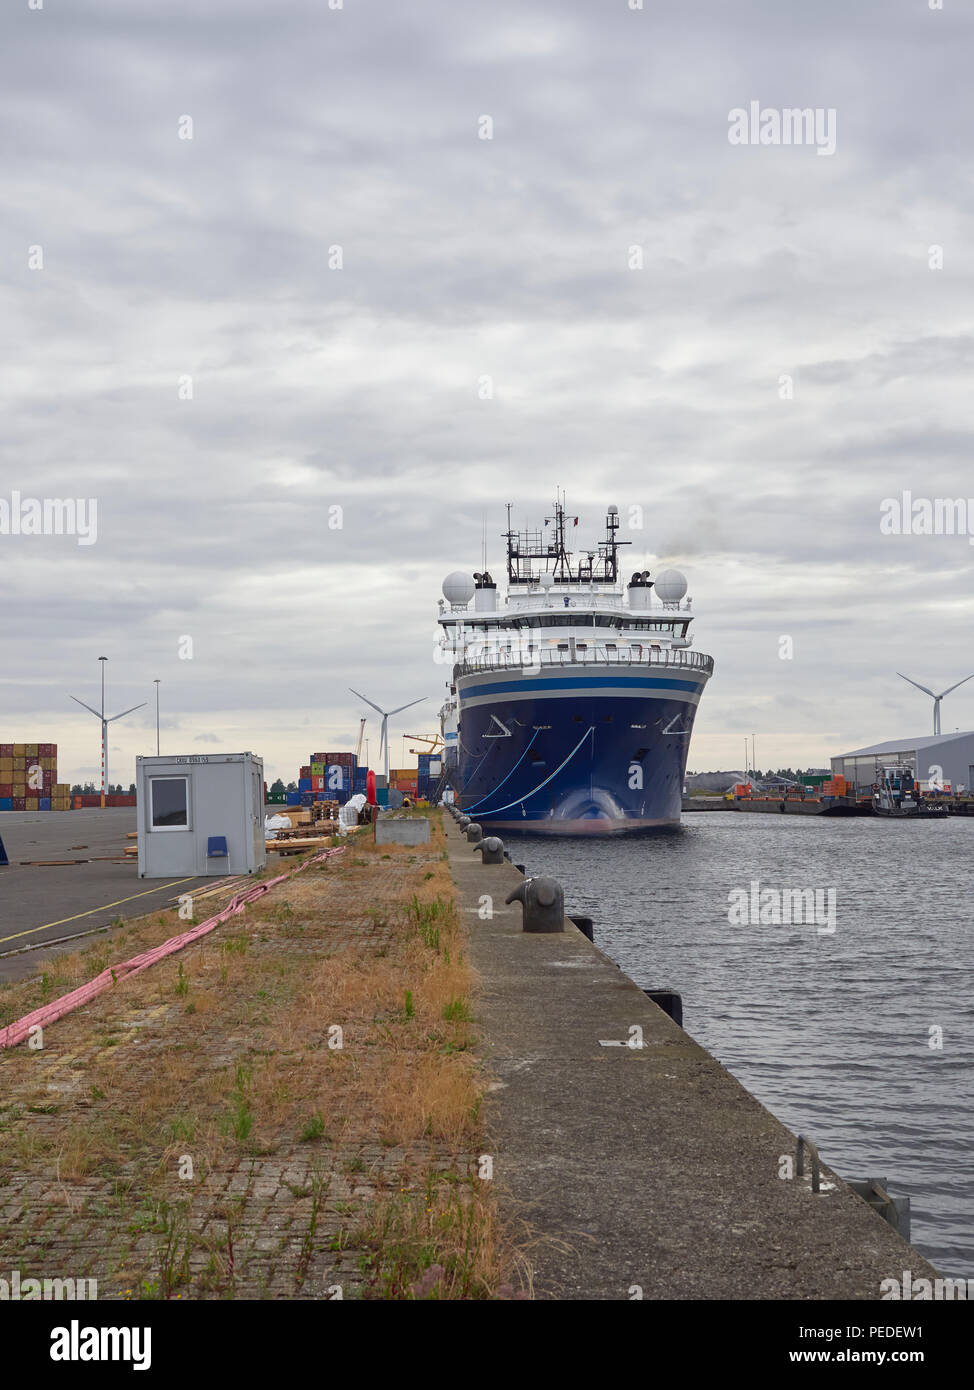 The Geo Caribbean moored up alongside the Quay at the Container Terminal in Den Haag, near Amsterdam, The Netherlands. Head on Picture. Stock Photo